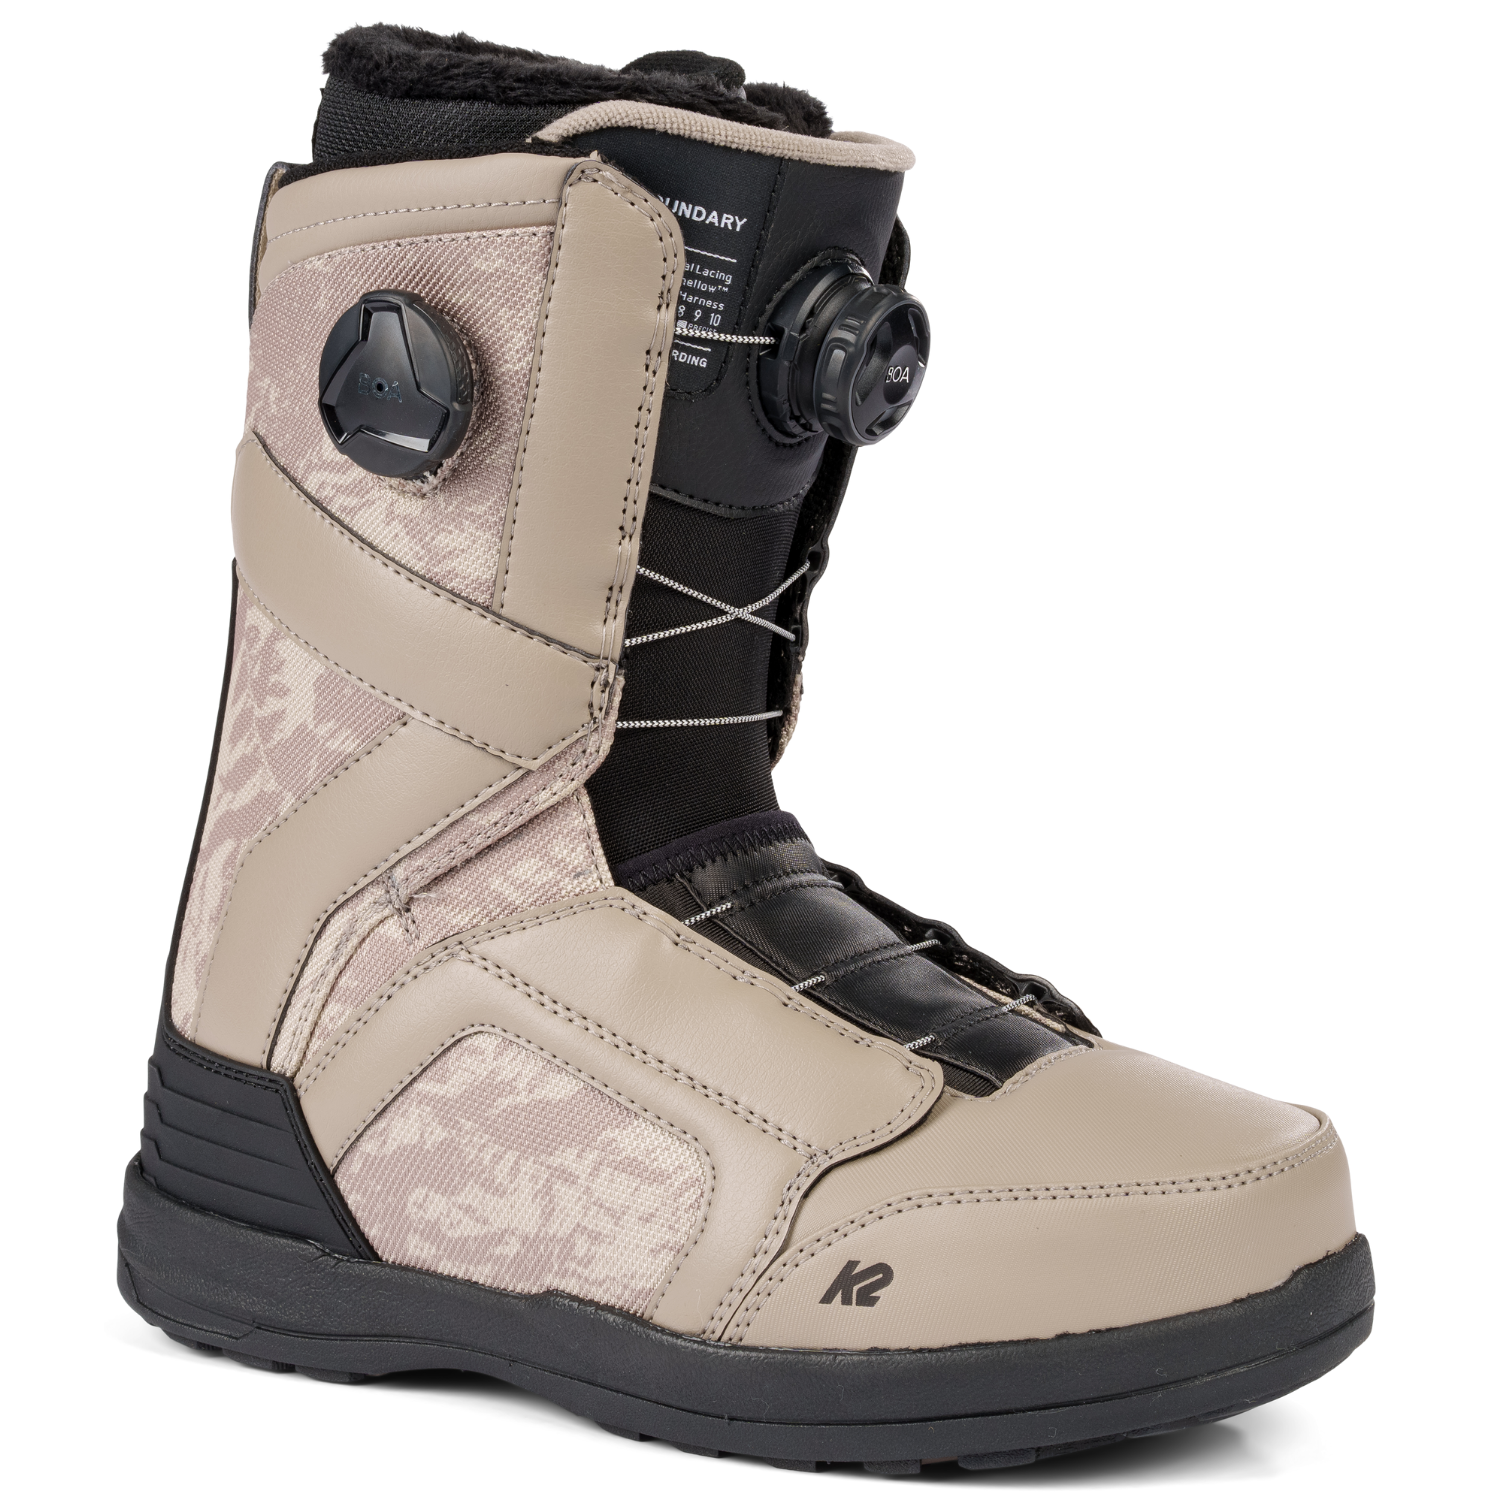 2023 K2 Boundary Snowboarding Boots For Sale